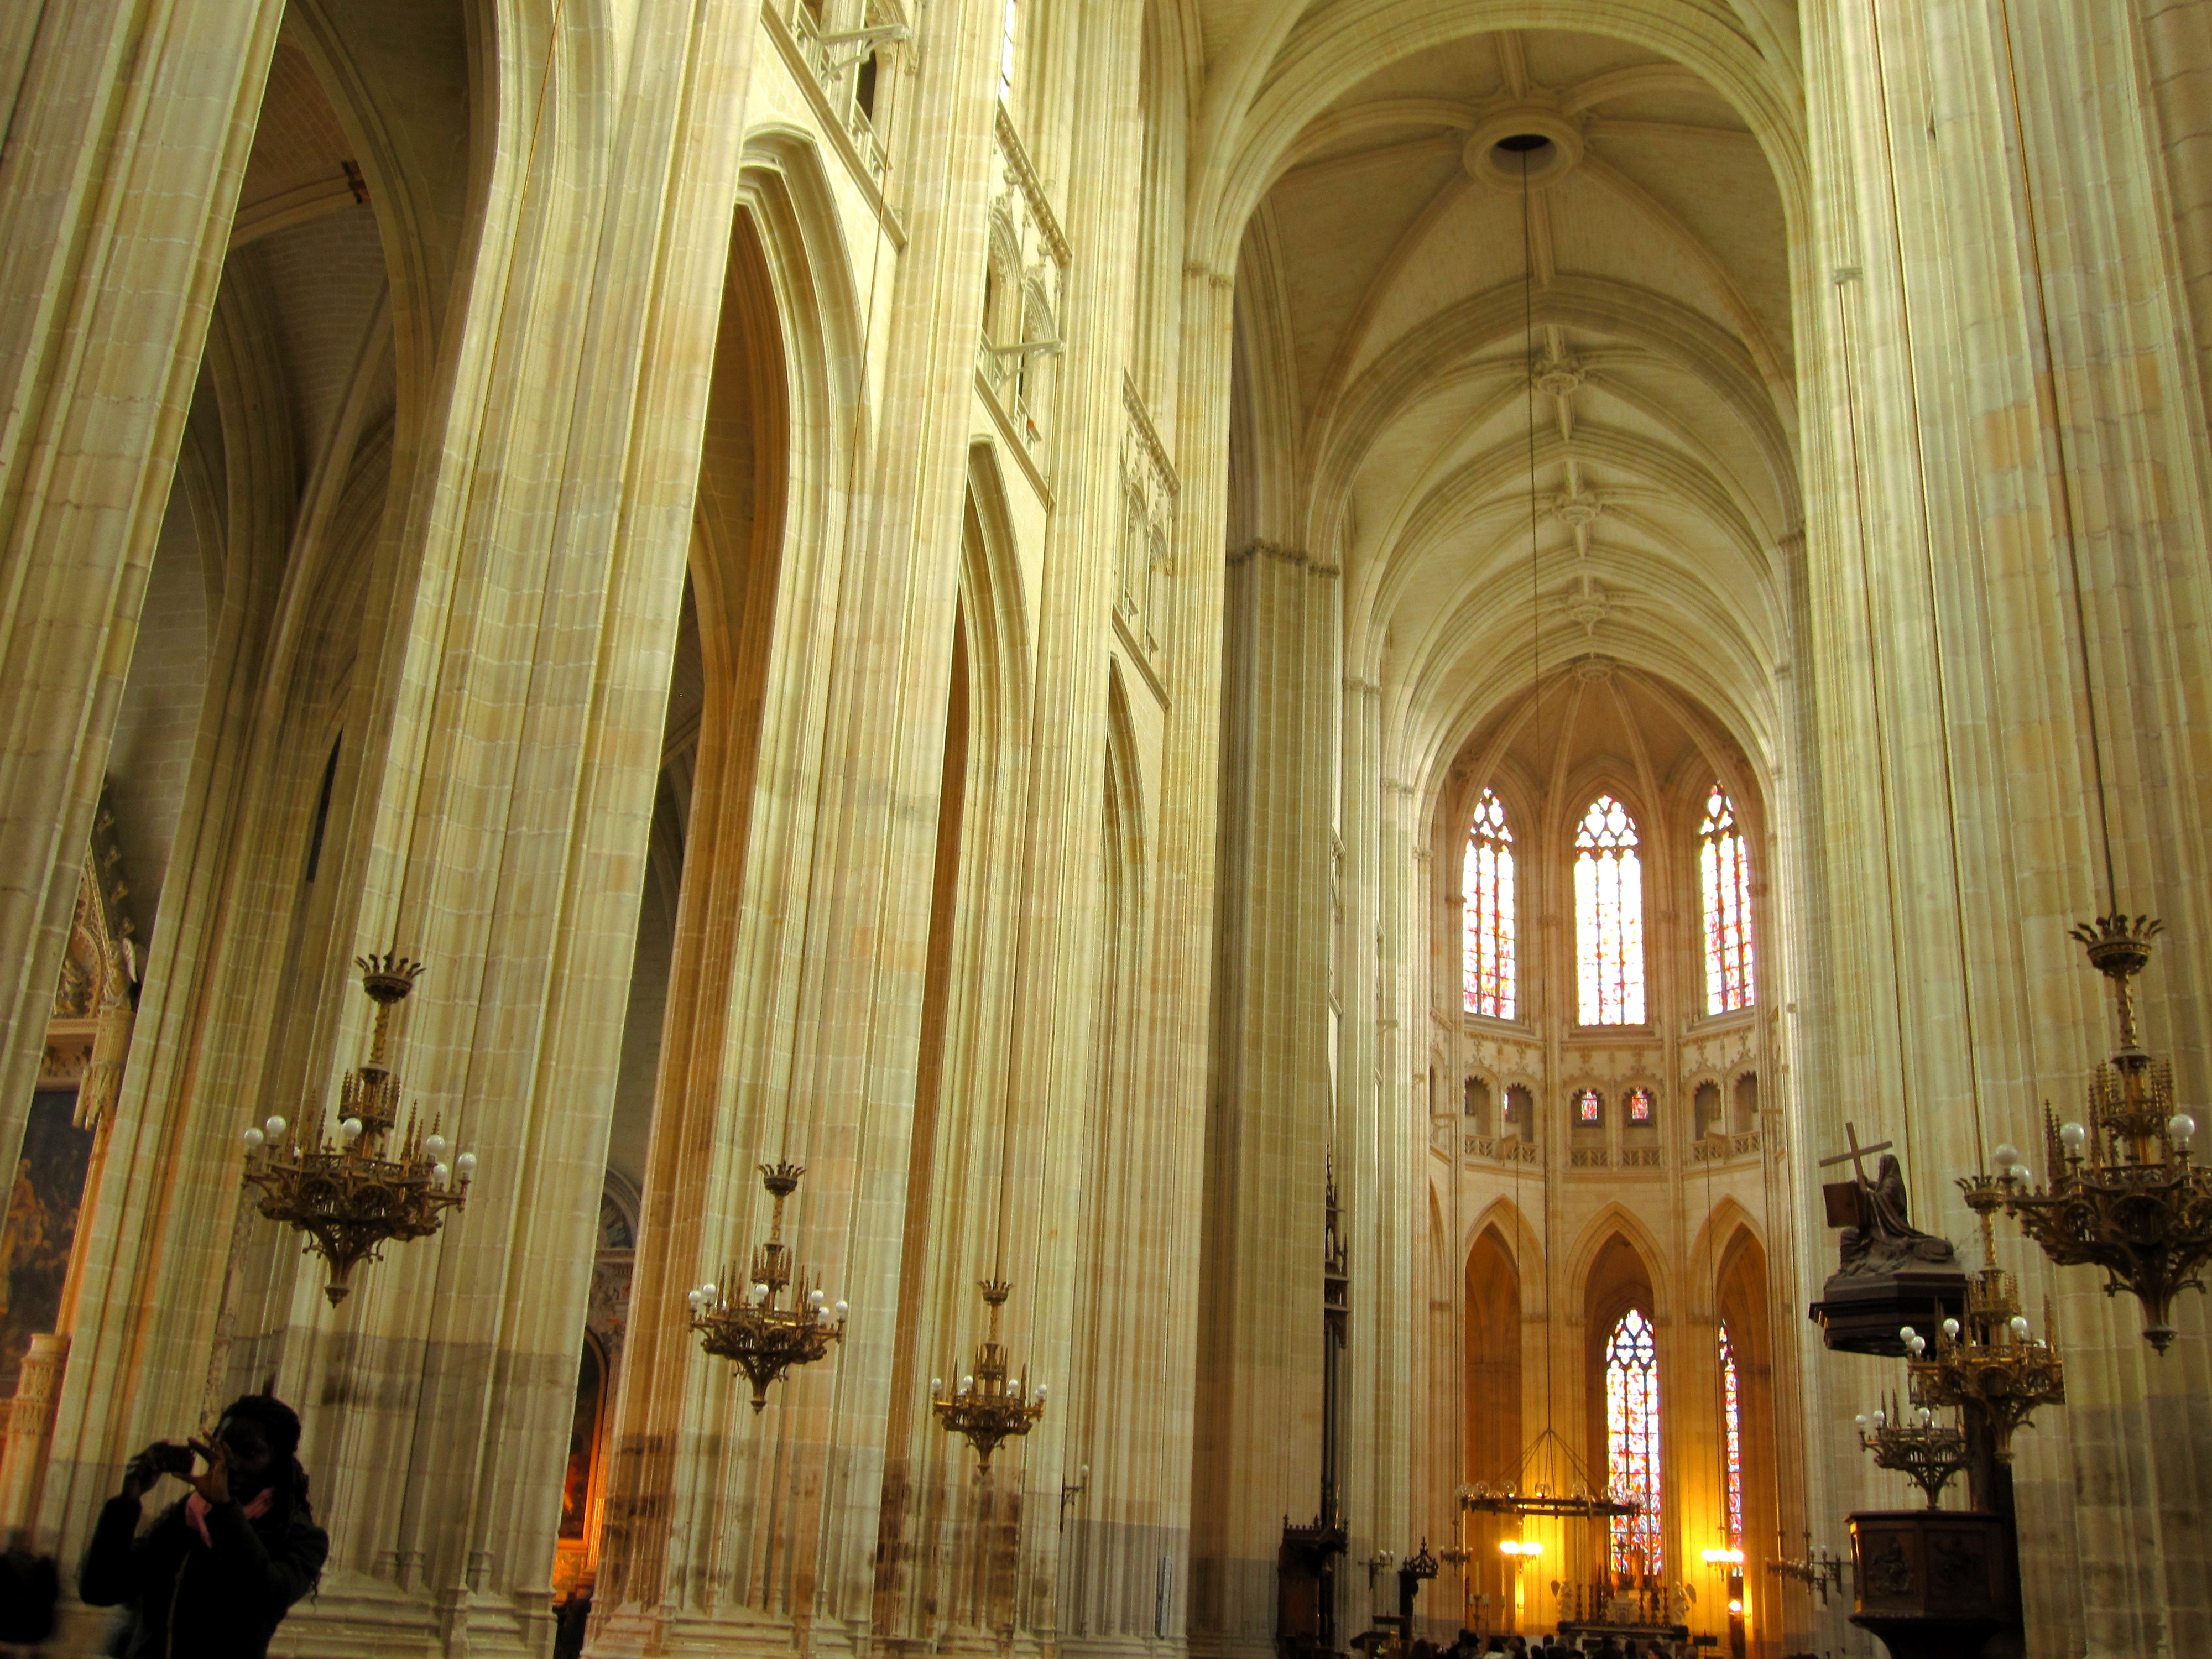 This is a cathedral in Nantes, which we saw during this week of tours and preparations.